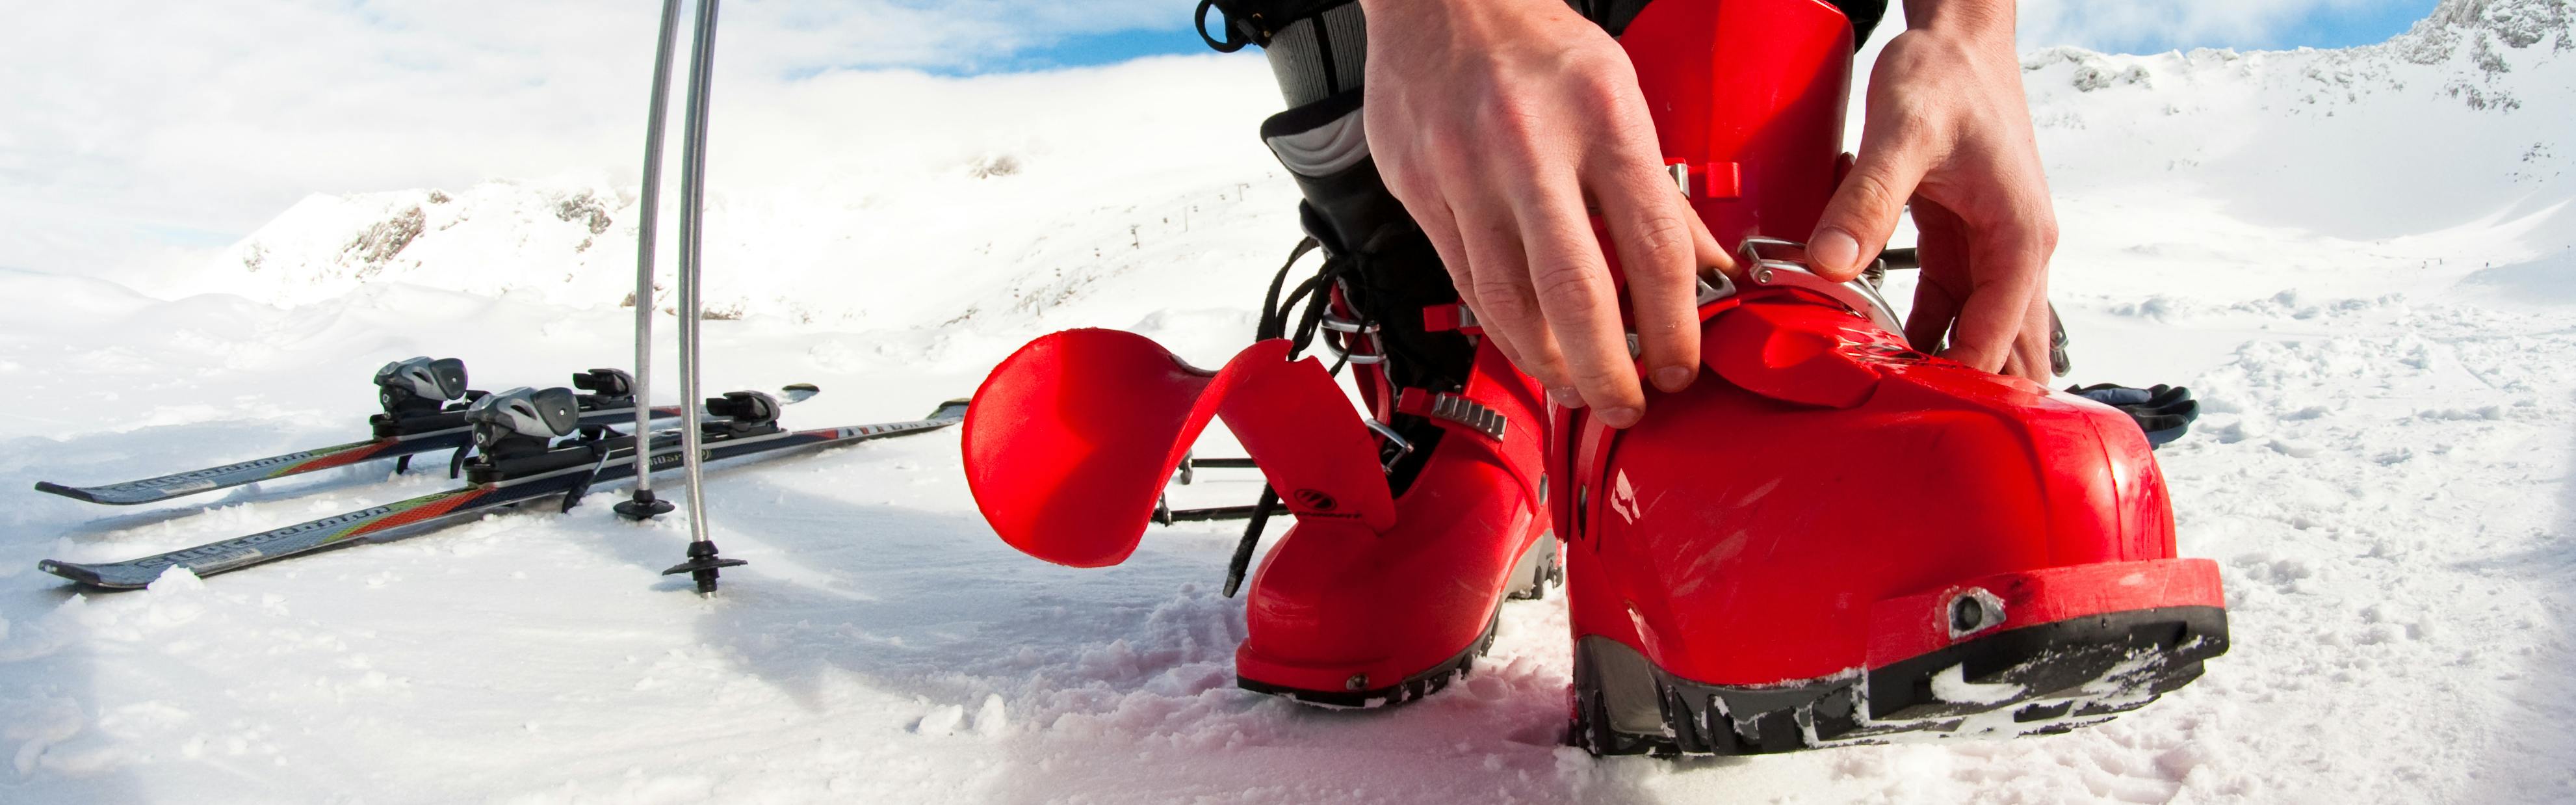 Ski Boot Size Guide: How to Buy Properly-Fitting Ski Boots